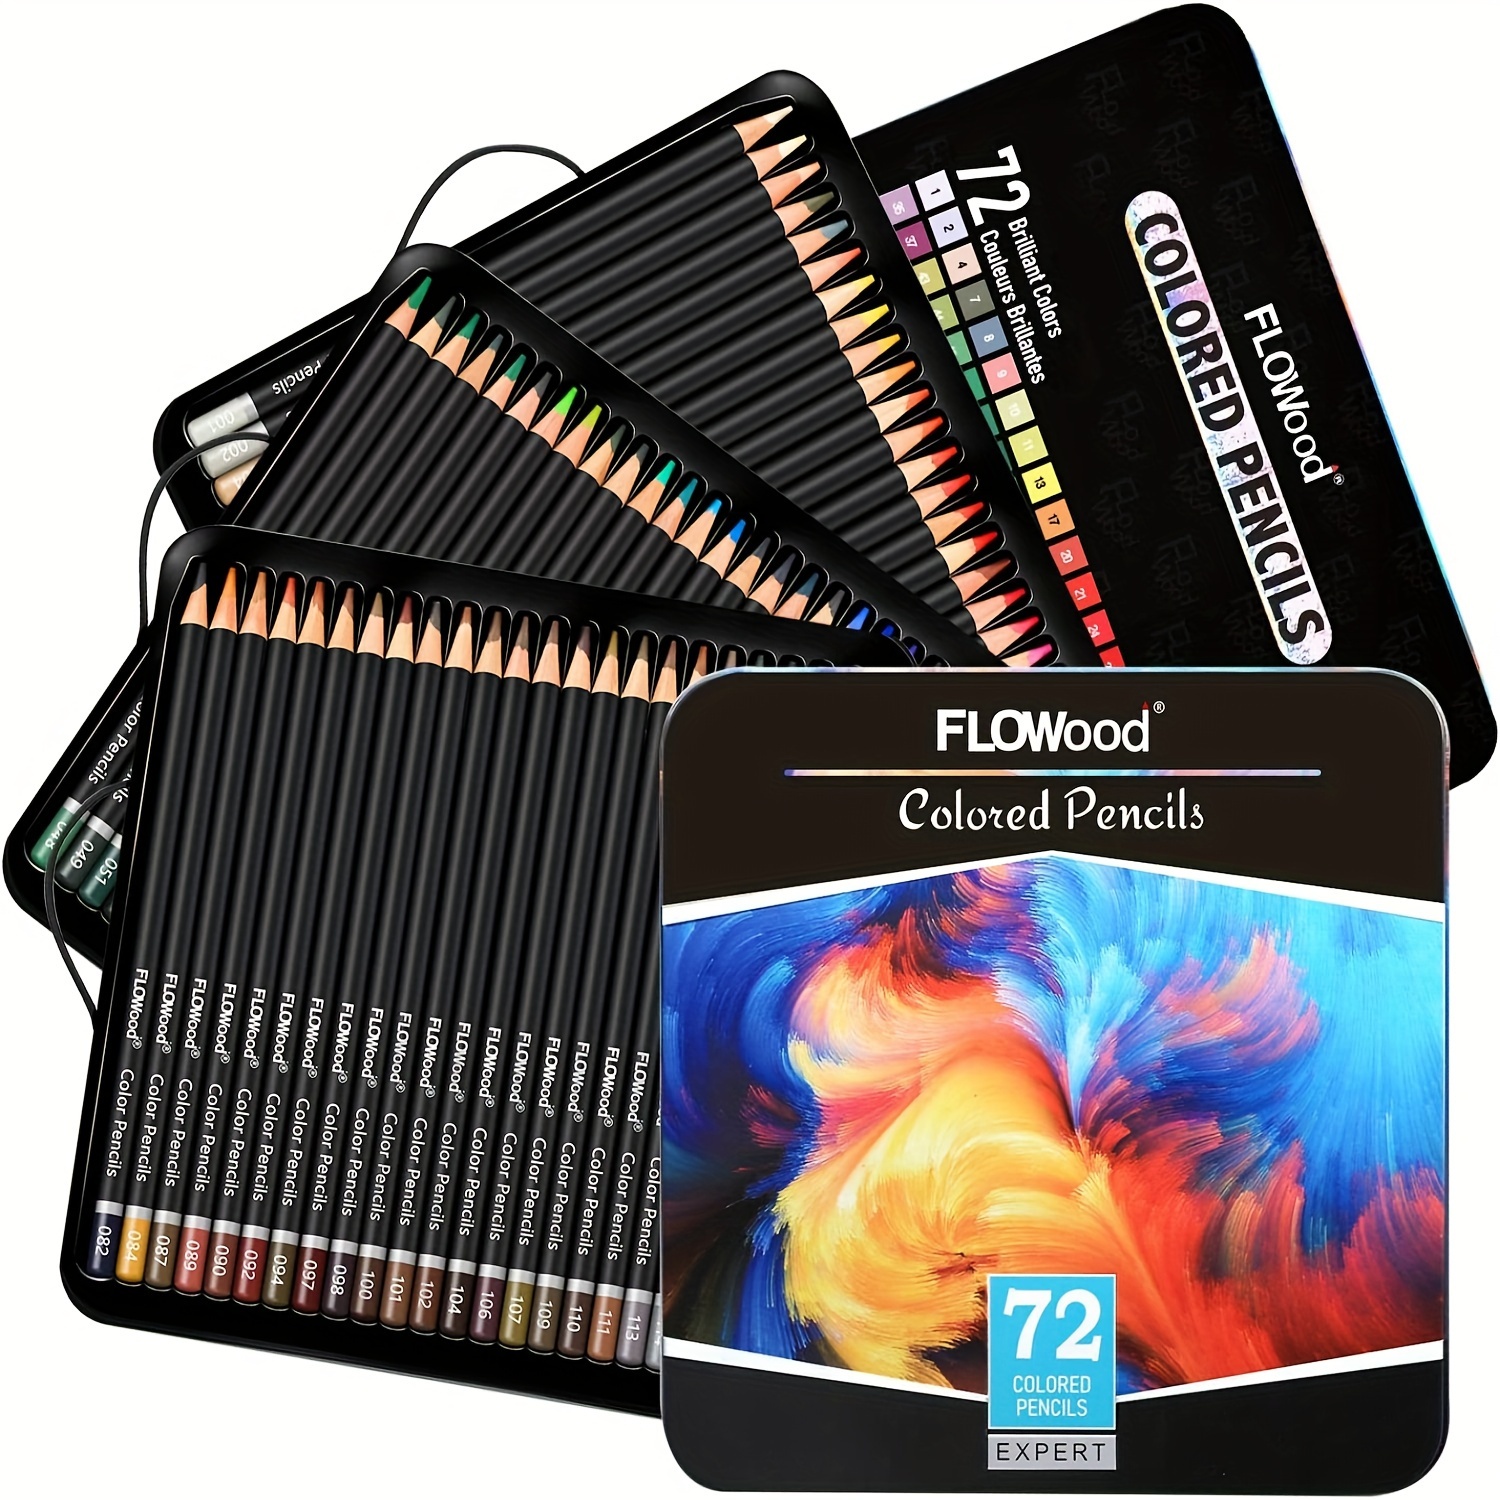 

Aipende Premium 72-color Pencil Set For Adults - Includes Sketchbook, Pre-sharpened 0.5mm Hb Lead, Perfect For Coloring, Drawing, And Shading